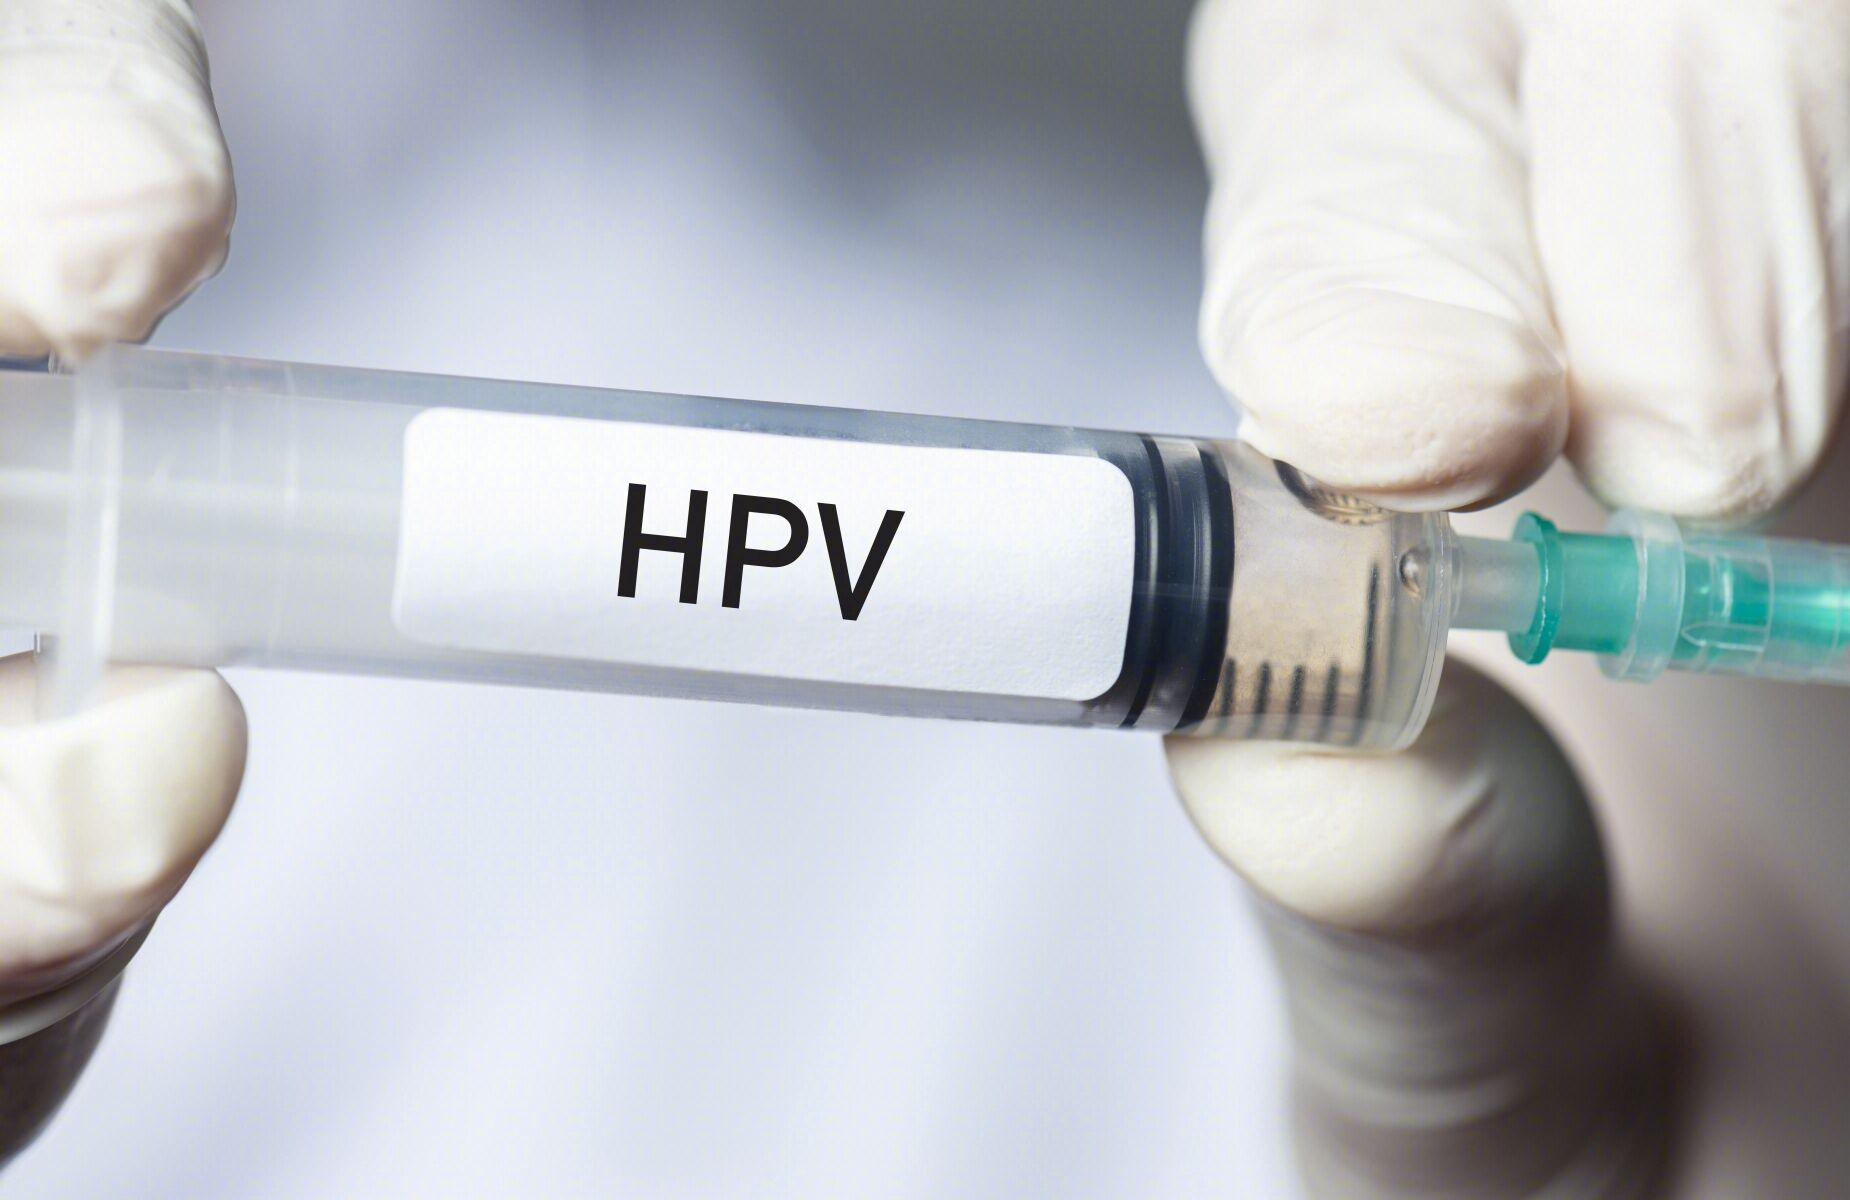 HPV Symptoms, Treatments and Natural Remedies - Well-Being Secrets